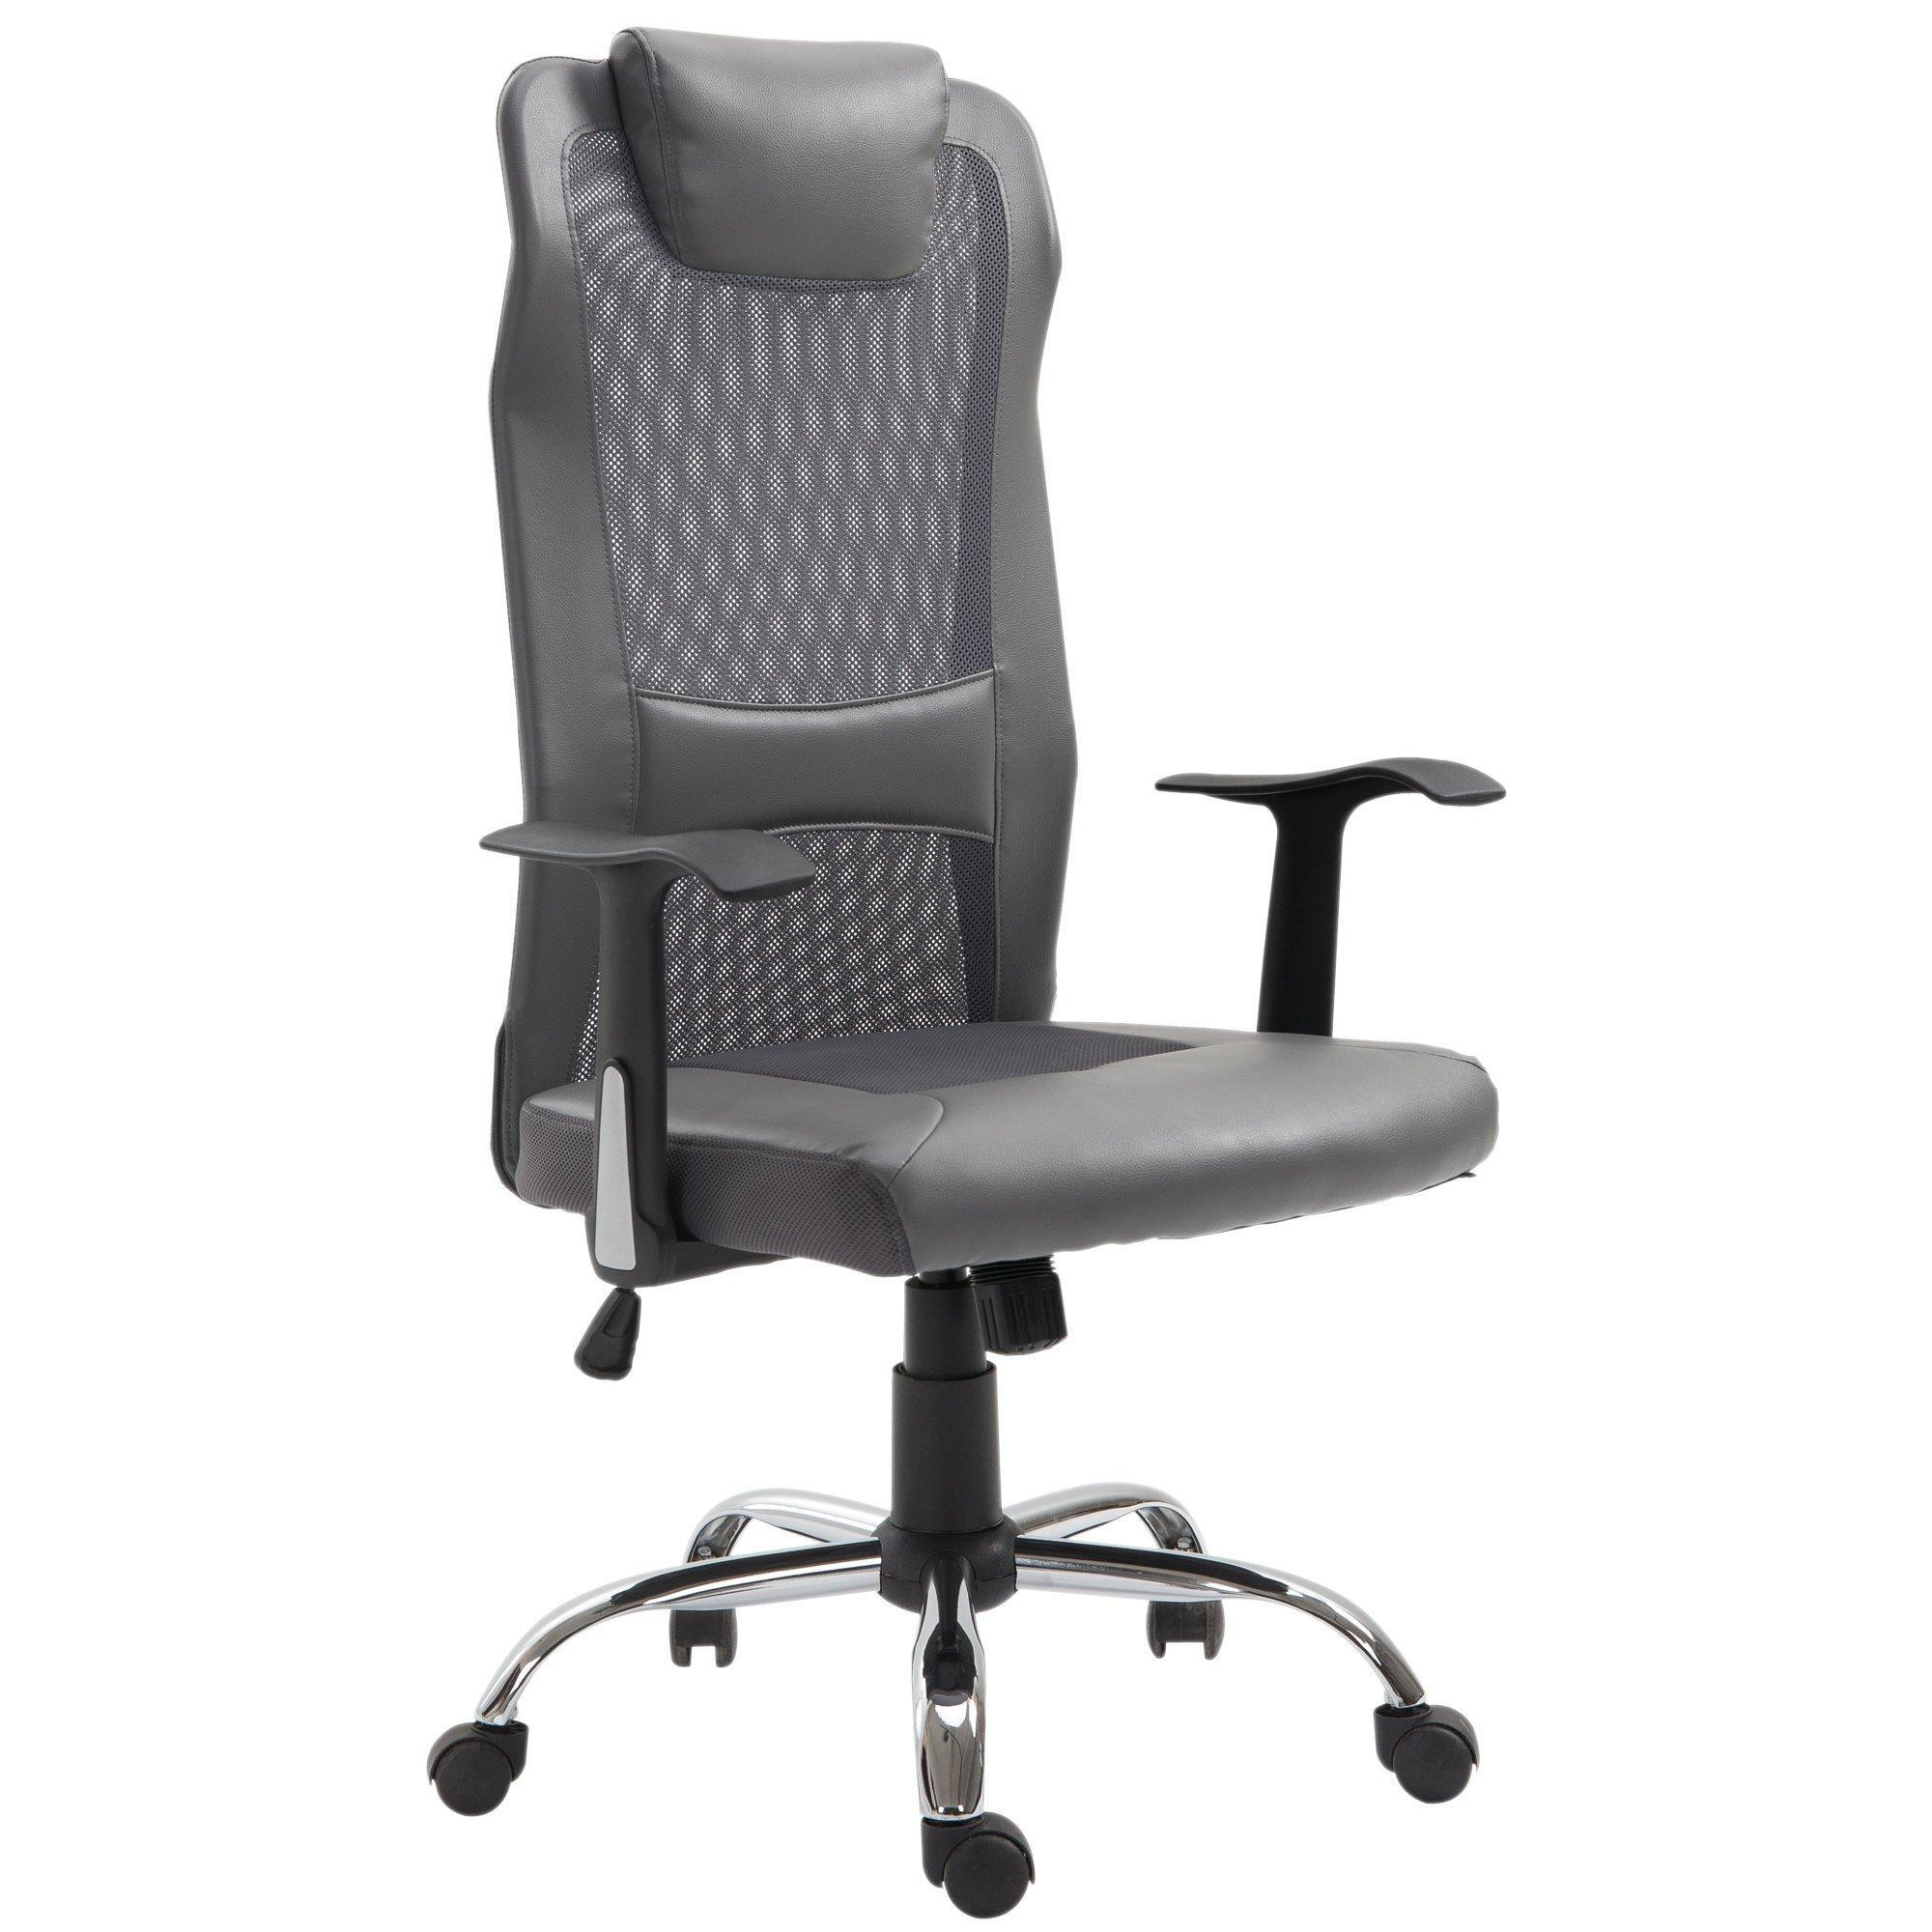 High Back Mesh Office Chair Swivel Desk Chair with Adjustable Height - image 1